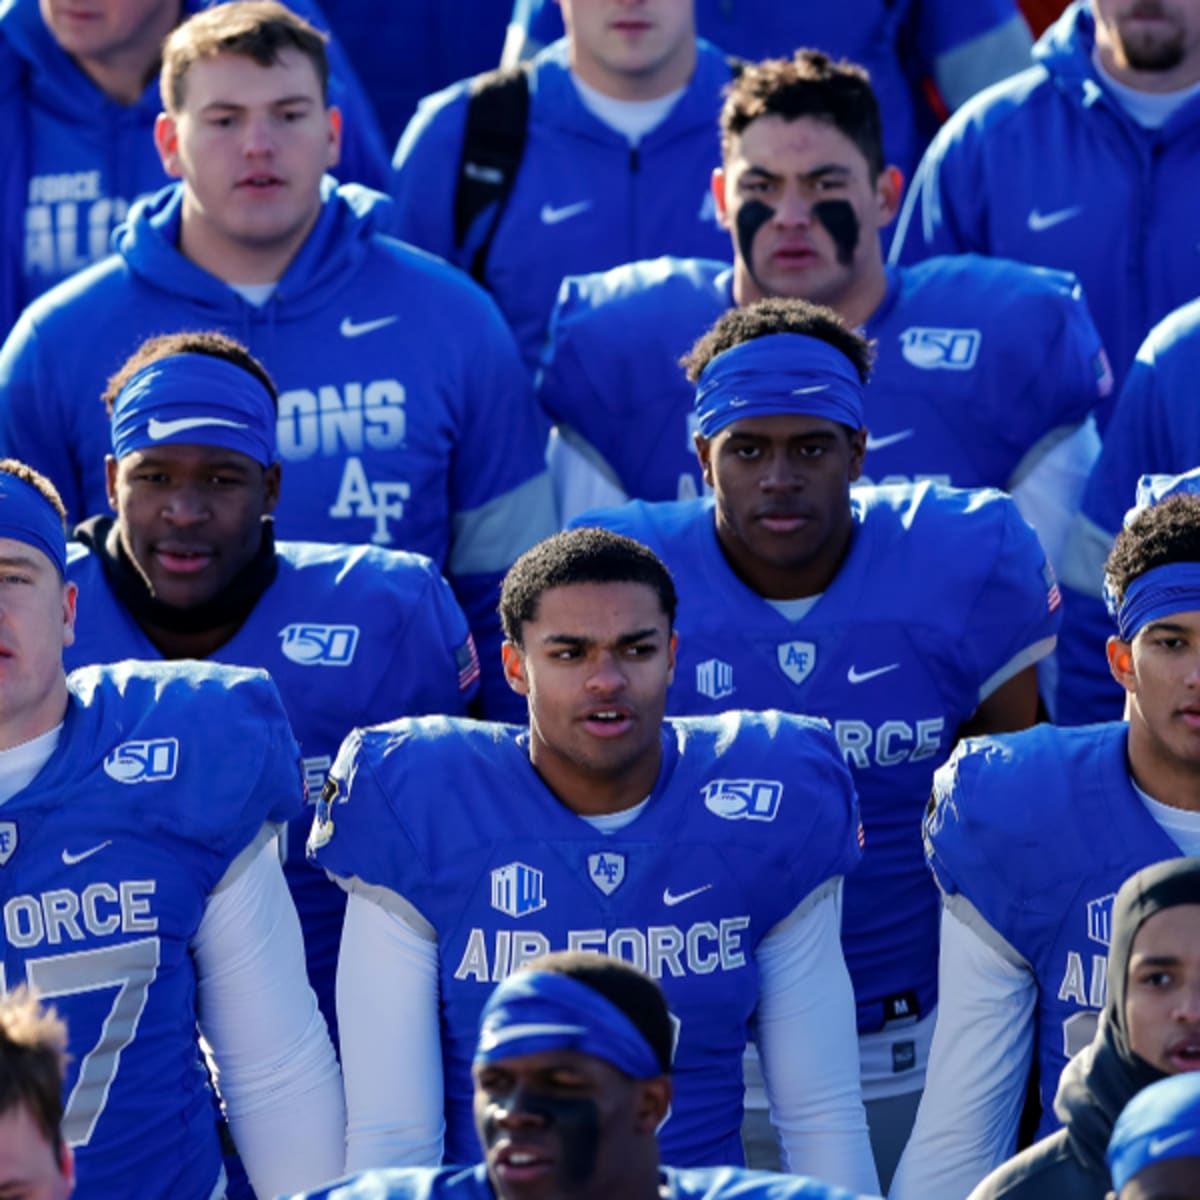 College football preview: Air Force Falcons prepare to sink Navy